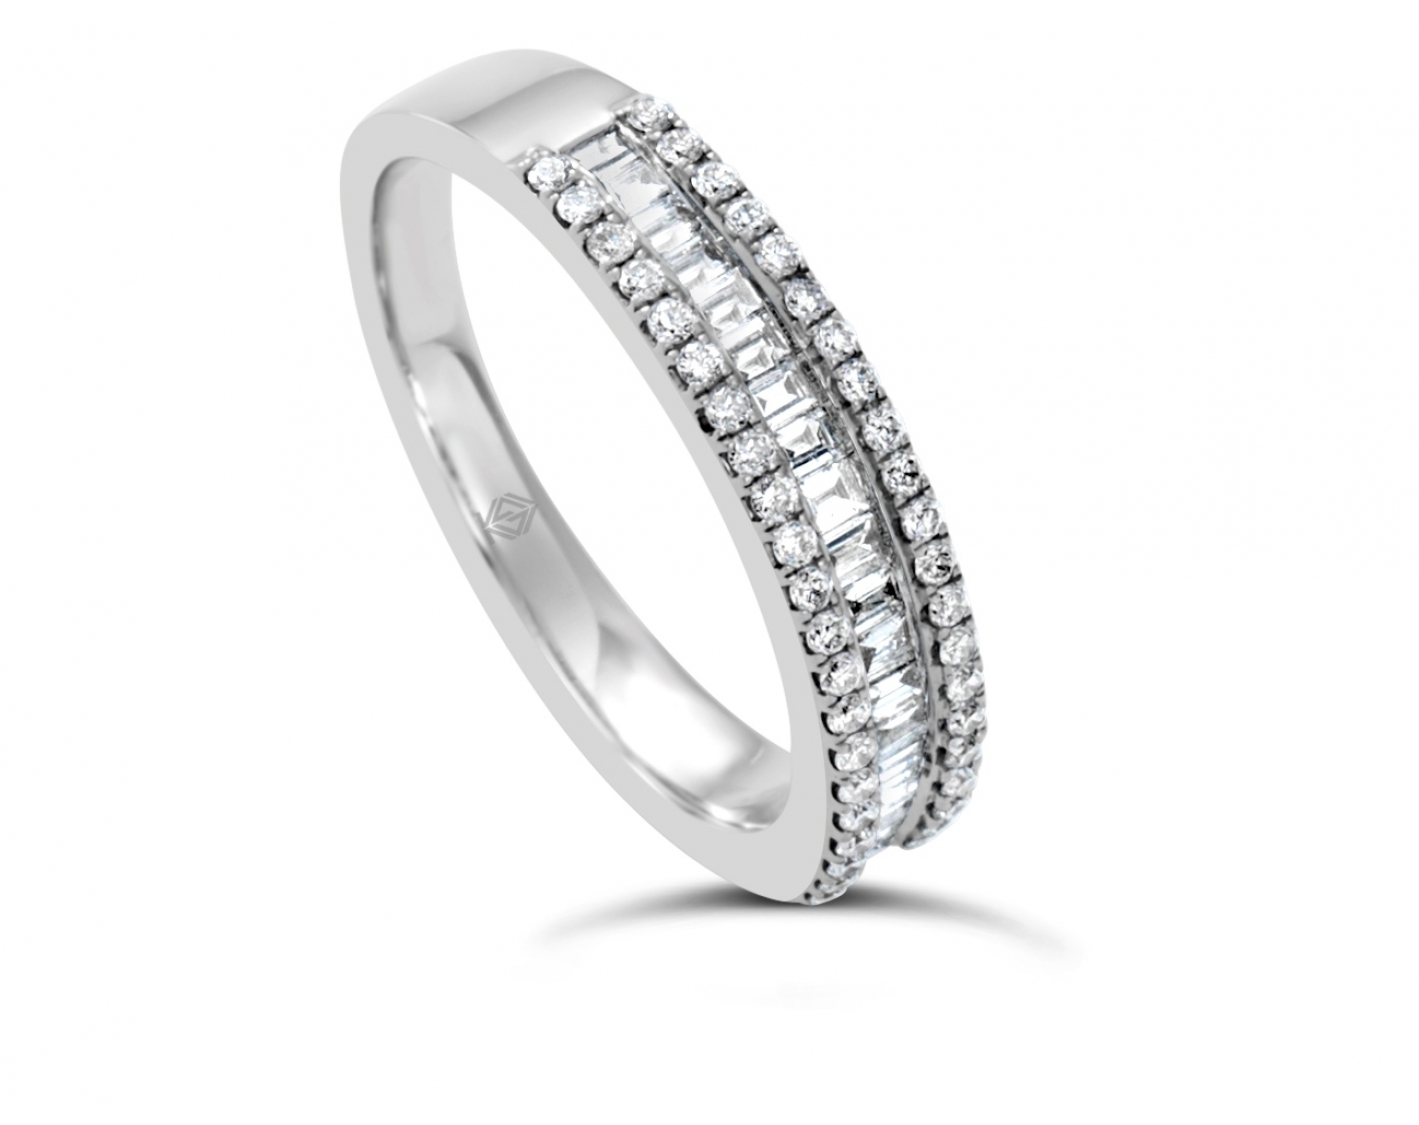 18k white gold half eternity round & emerald cut diamonds in pave & channel set wedding band Photos & images